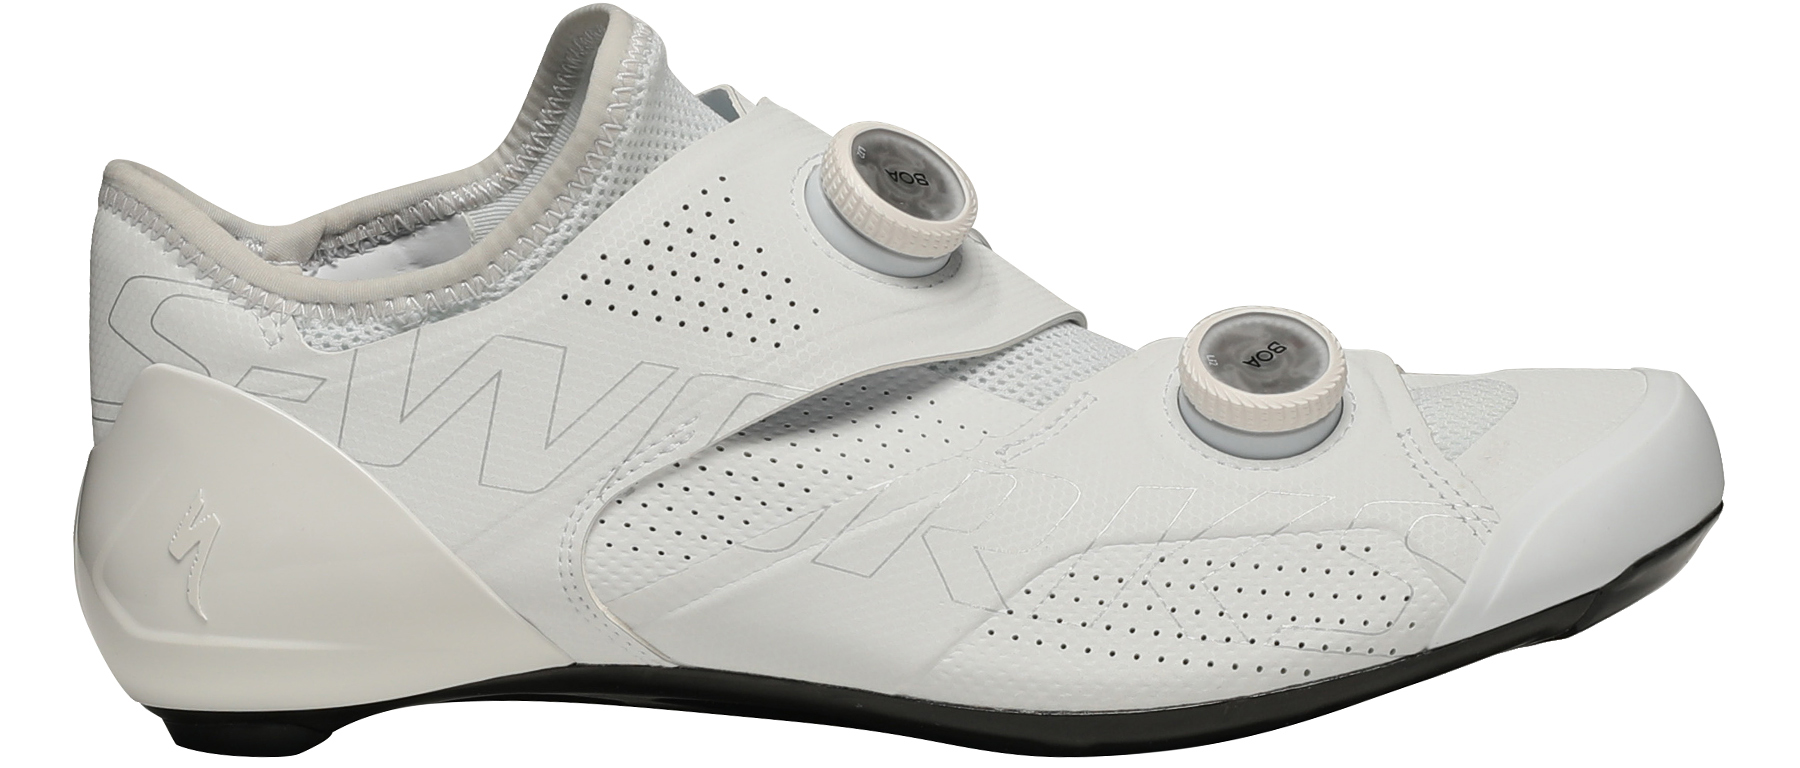 38 37 40 New-Old-Stock Specialized Sport Road Shoes 2 or 3-bolt Cleat-Size 36 